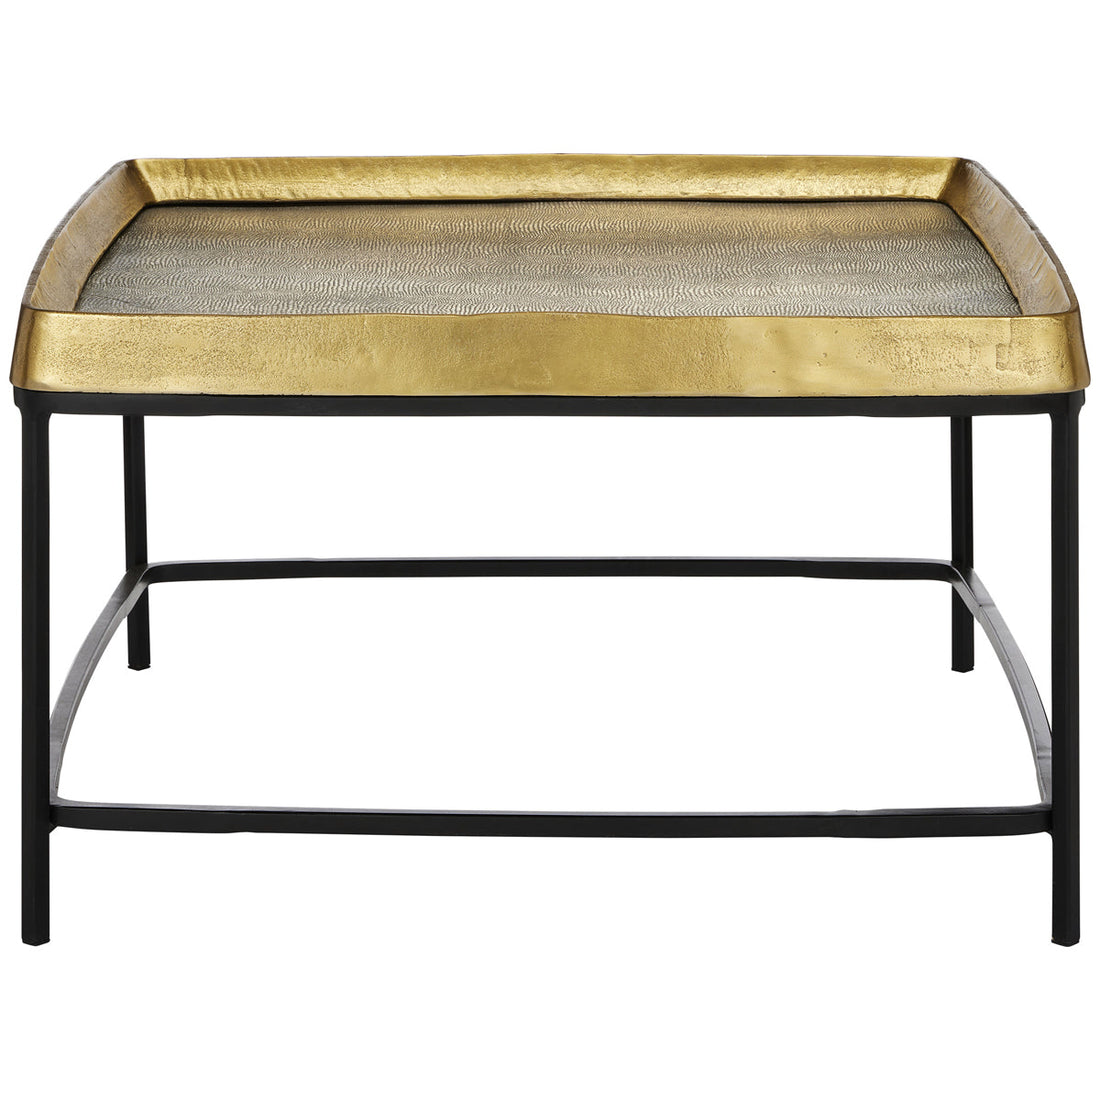 Currey and Company Tanay Brass Cocktail Table